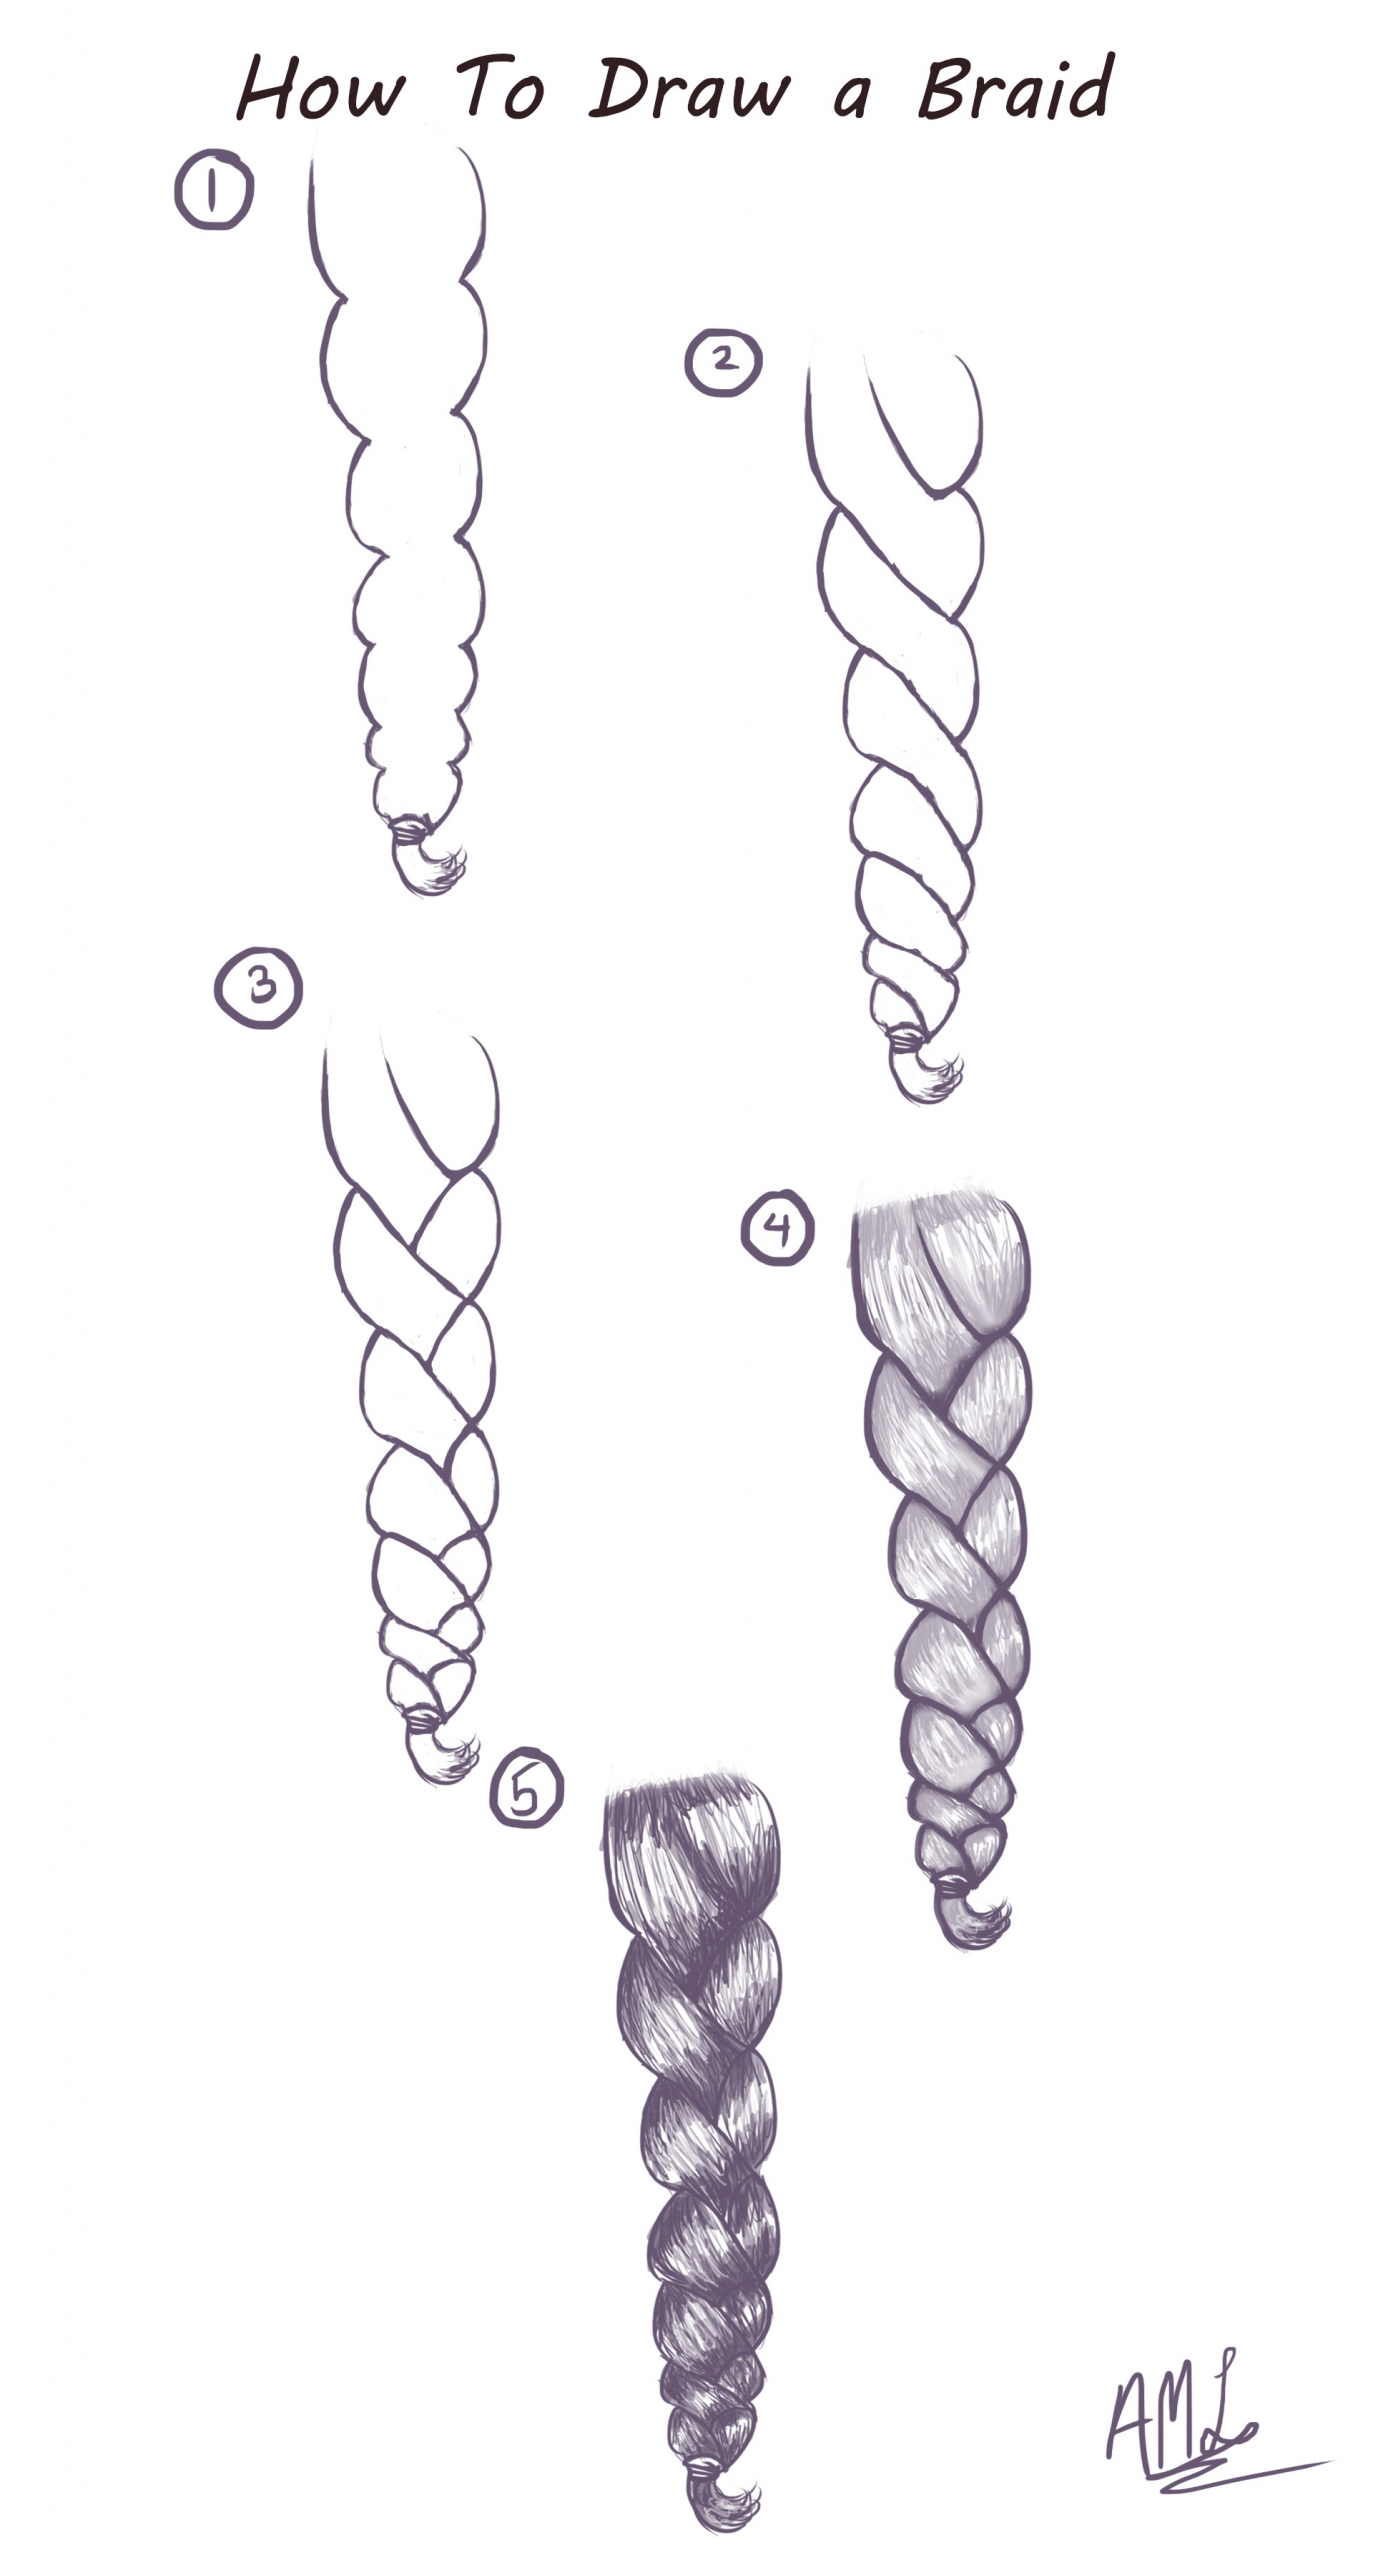 How To Draw Hairstyles Easy
 How To Draw a Braid Here is a quick and easy Tutorial on